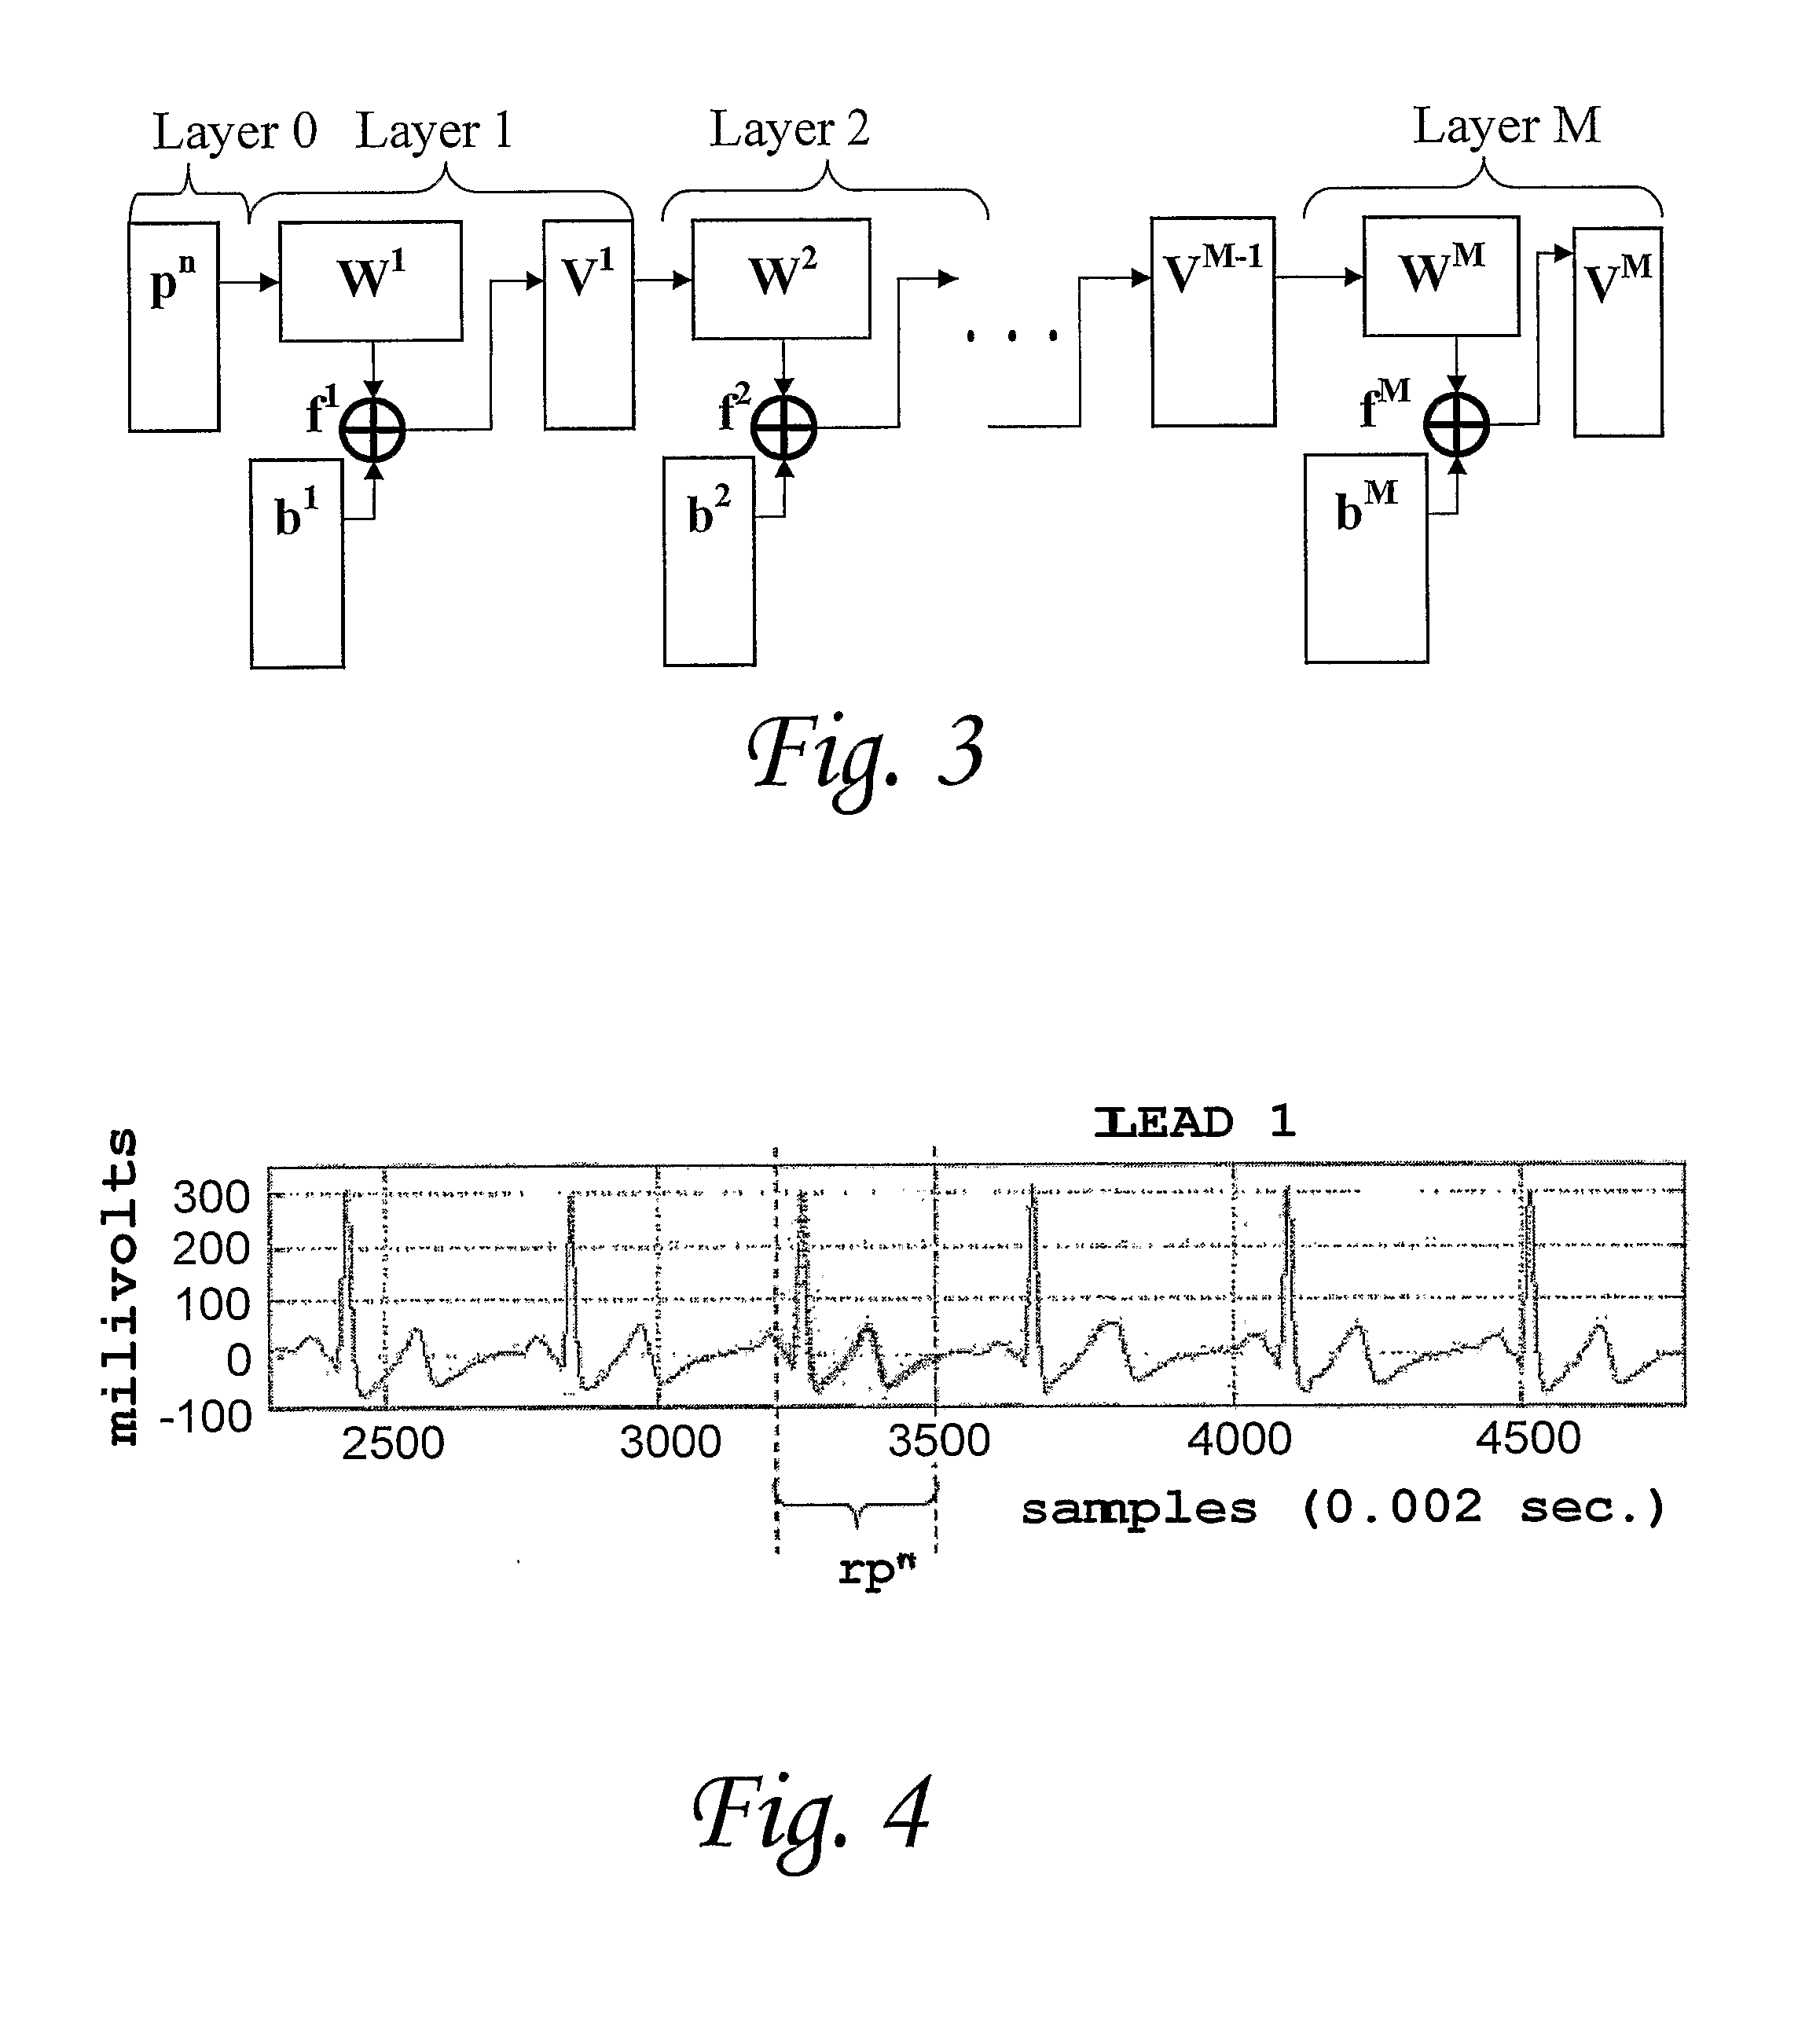 Method and System for Diagnosis of Cardiac Diseases Utilizing Neural Networks